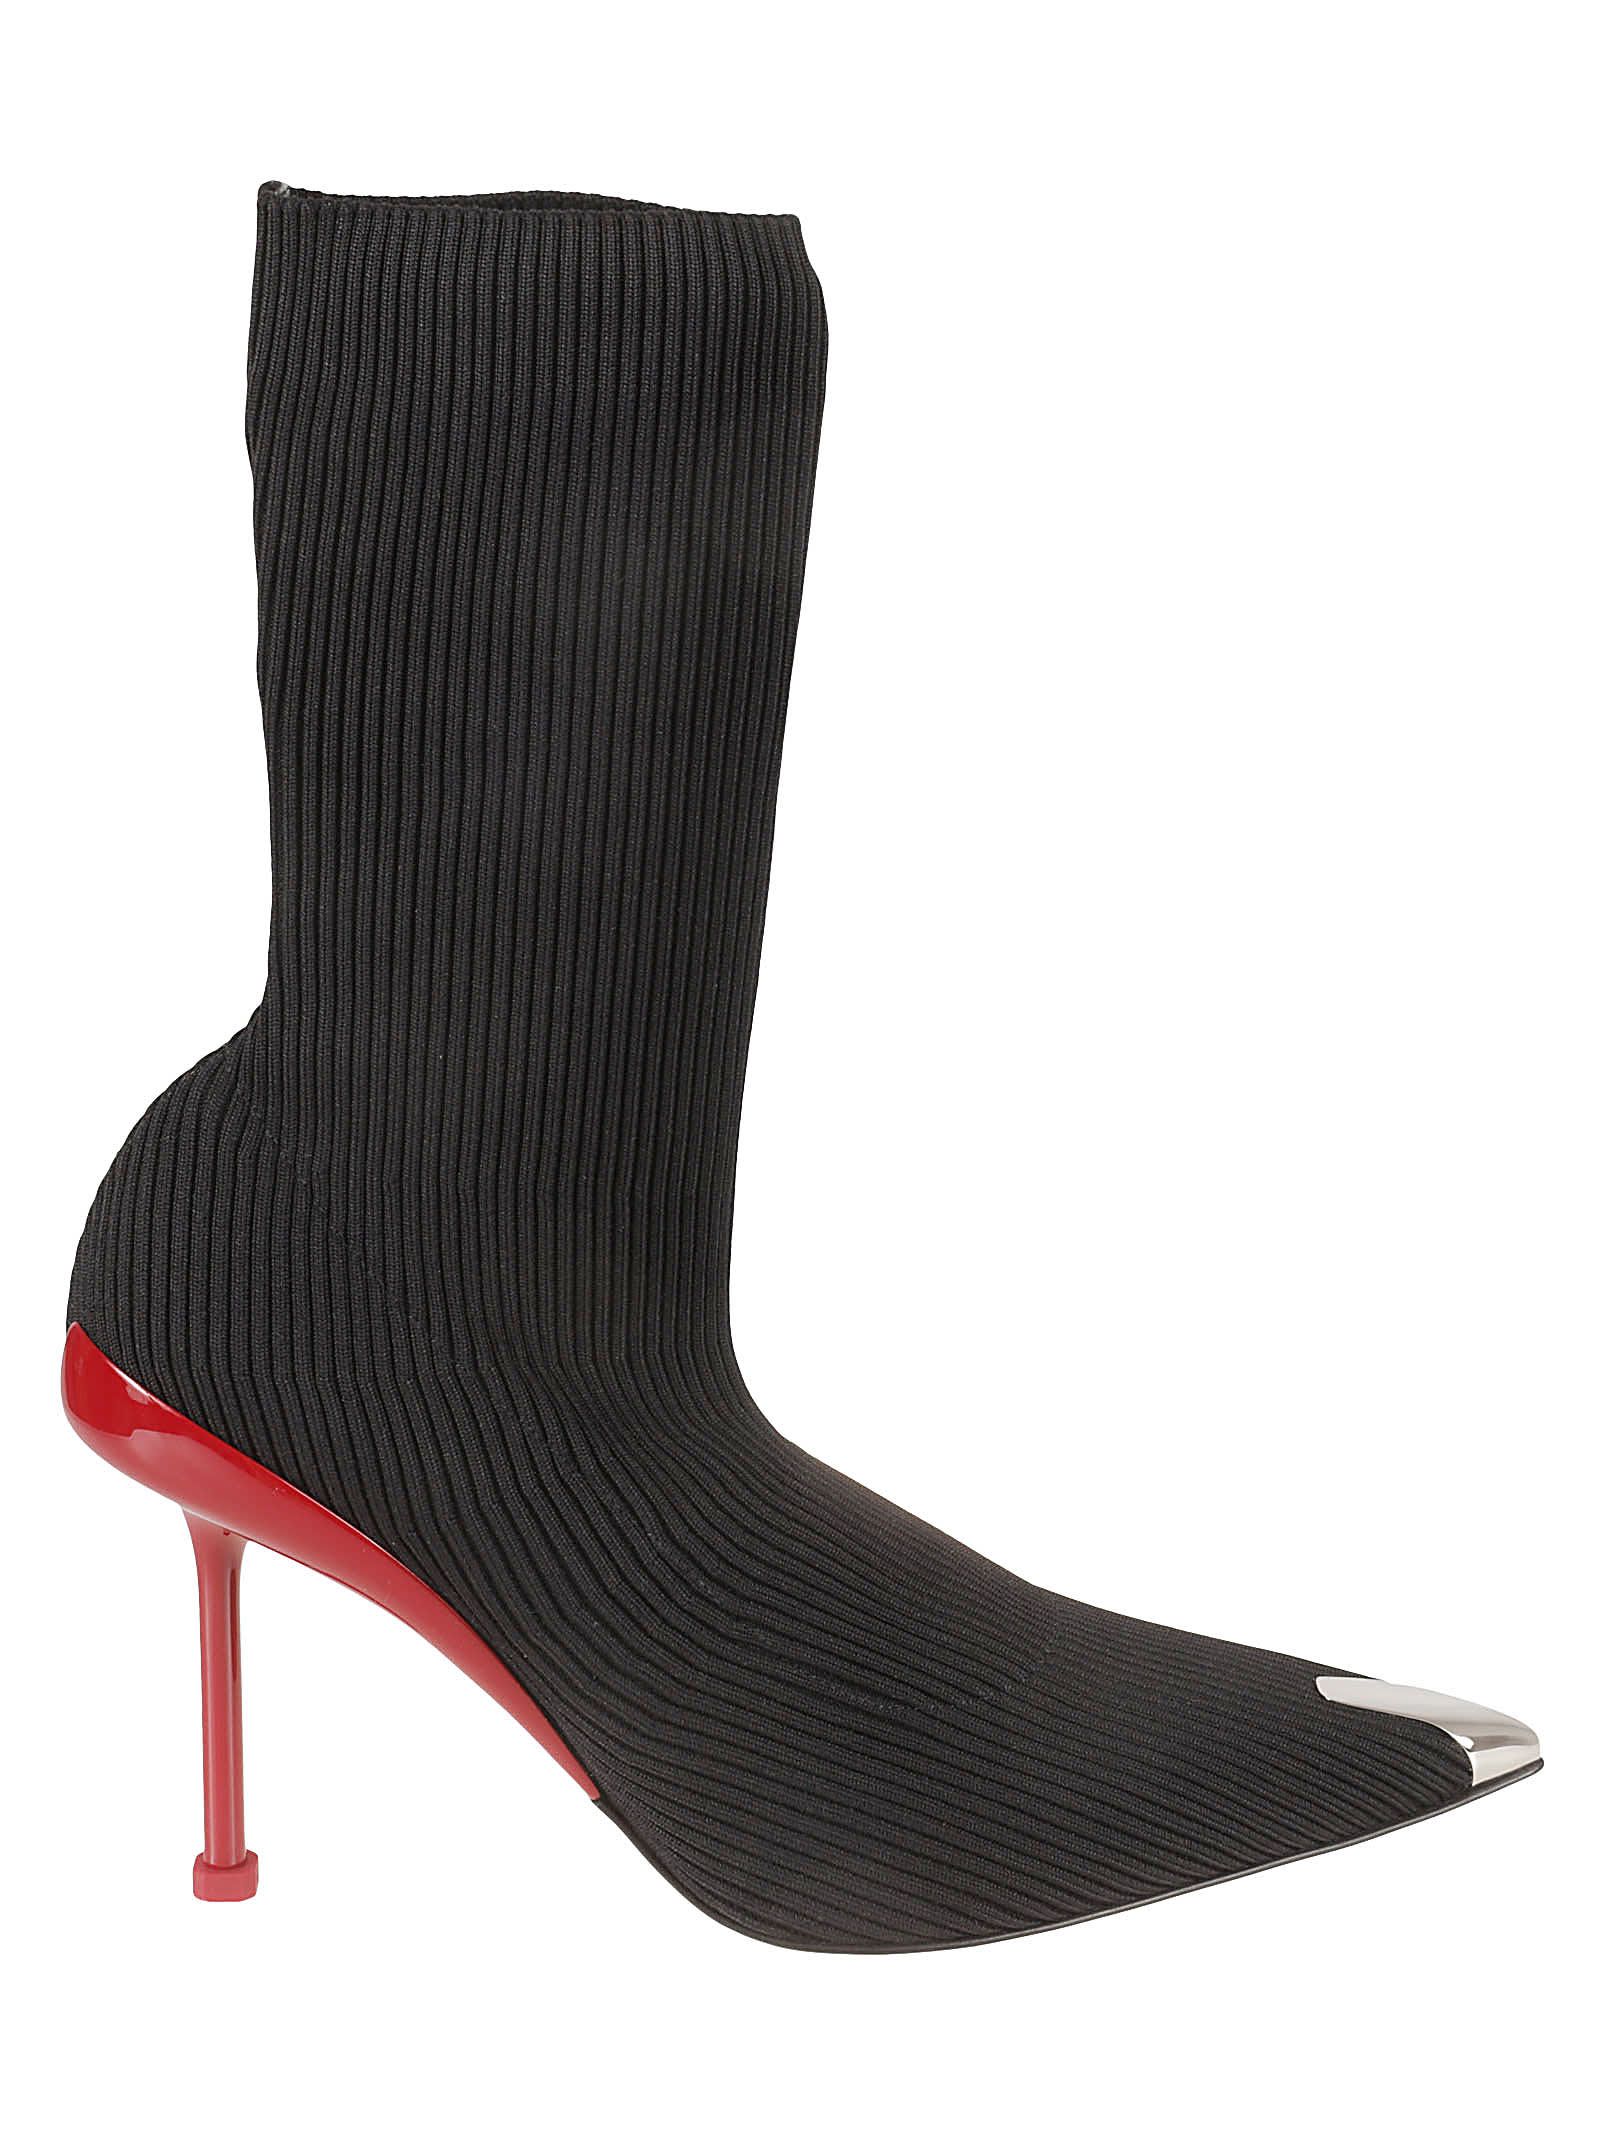 Alexander Mcqueen Rib Knit Boots In Black/blood Red/silver